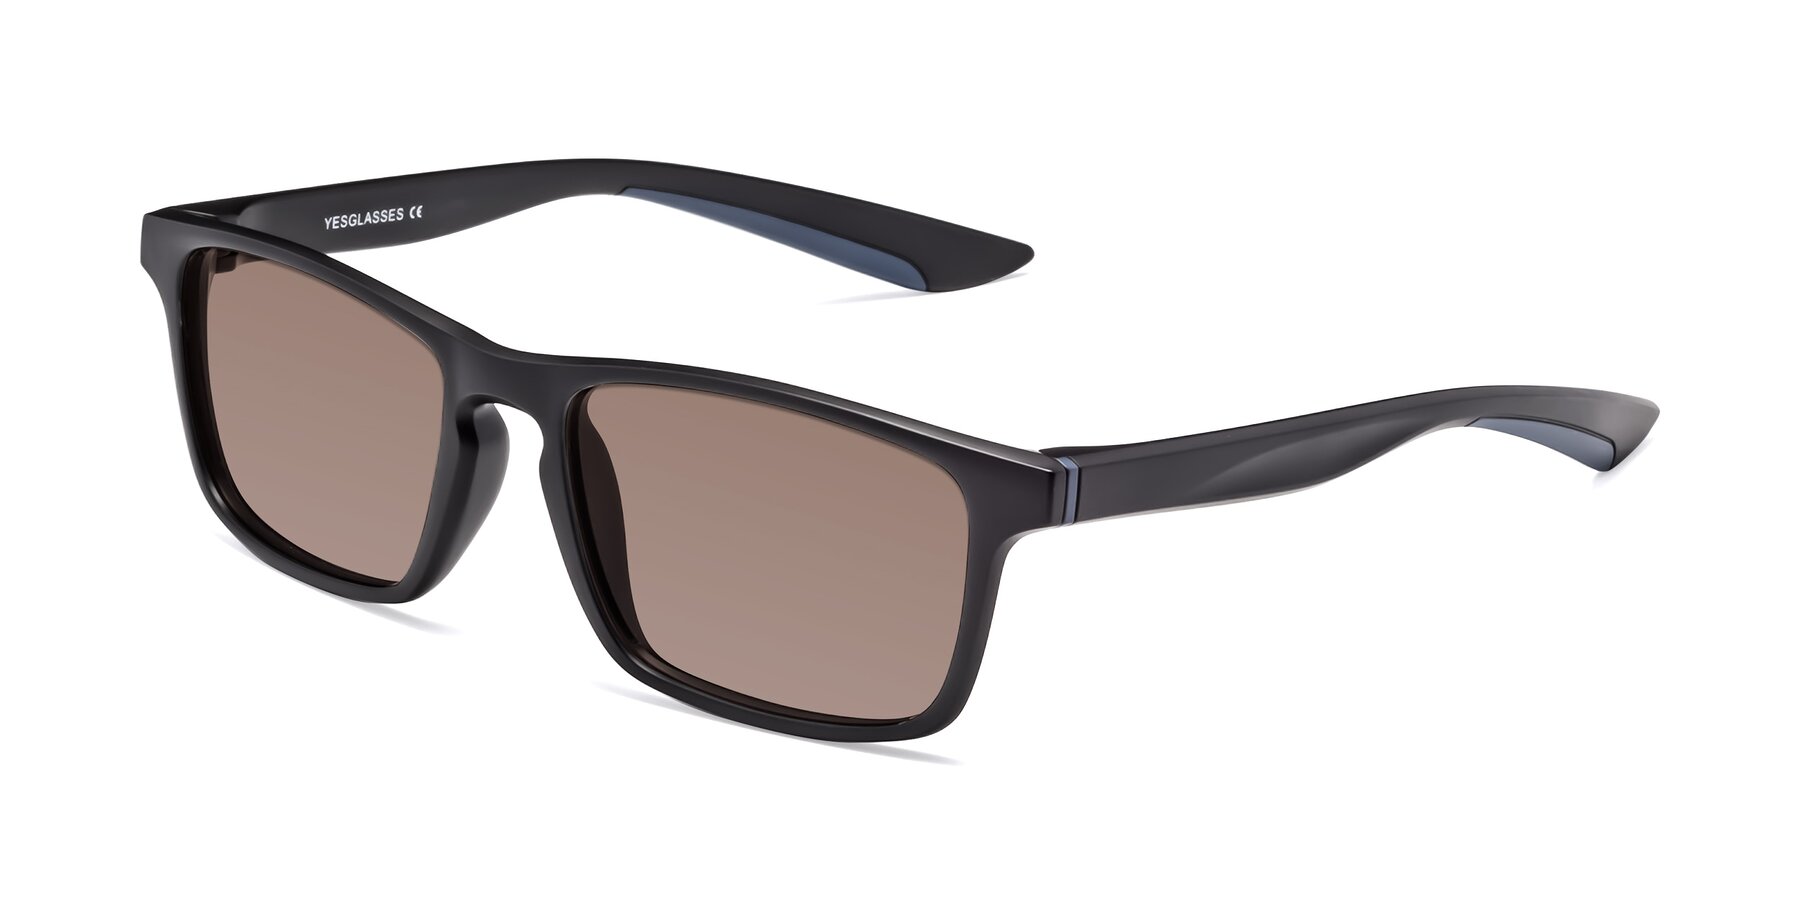 Angle of Passion in Matte Black-Blue with Medium Brown Tinted Lenses